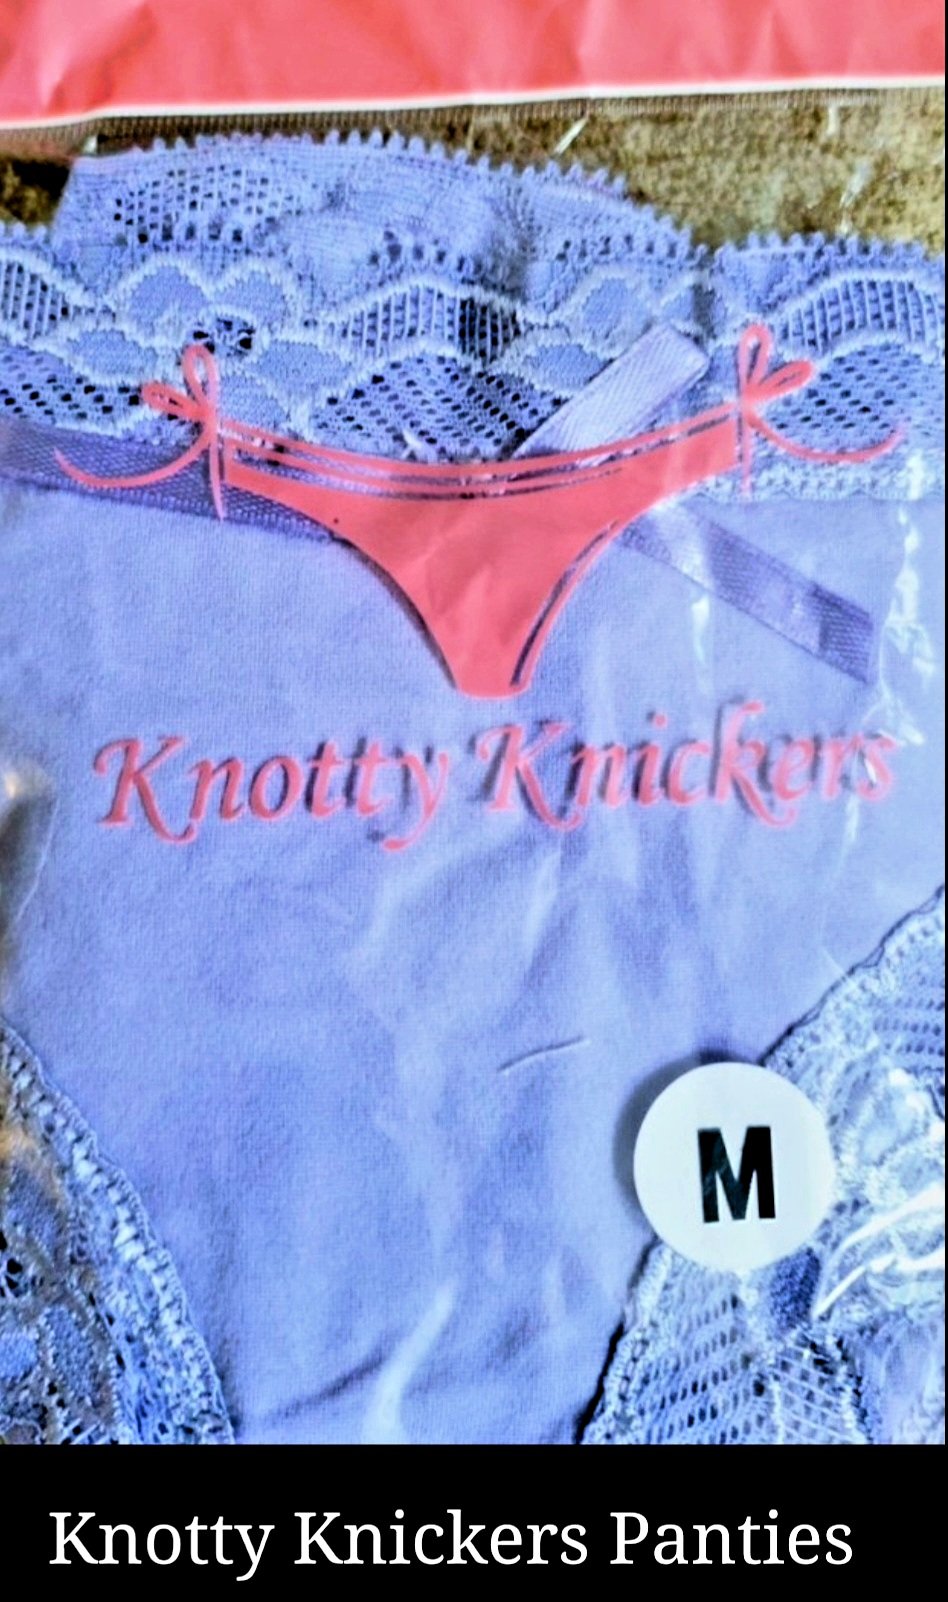 Sexy Knotty Knickers Or Not Review – Online Shopping Tips and Reviews